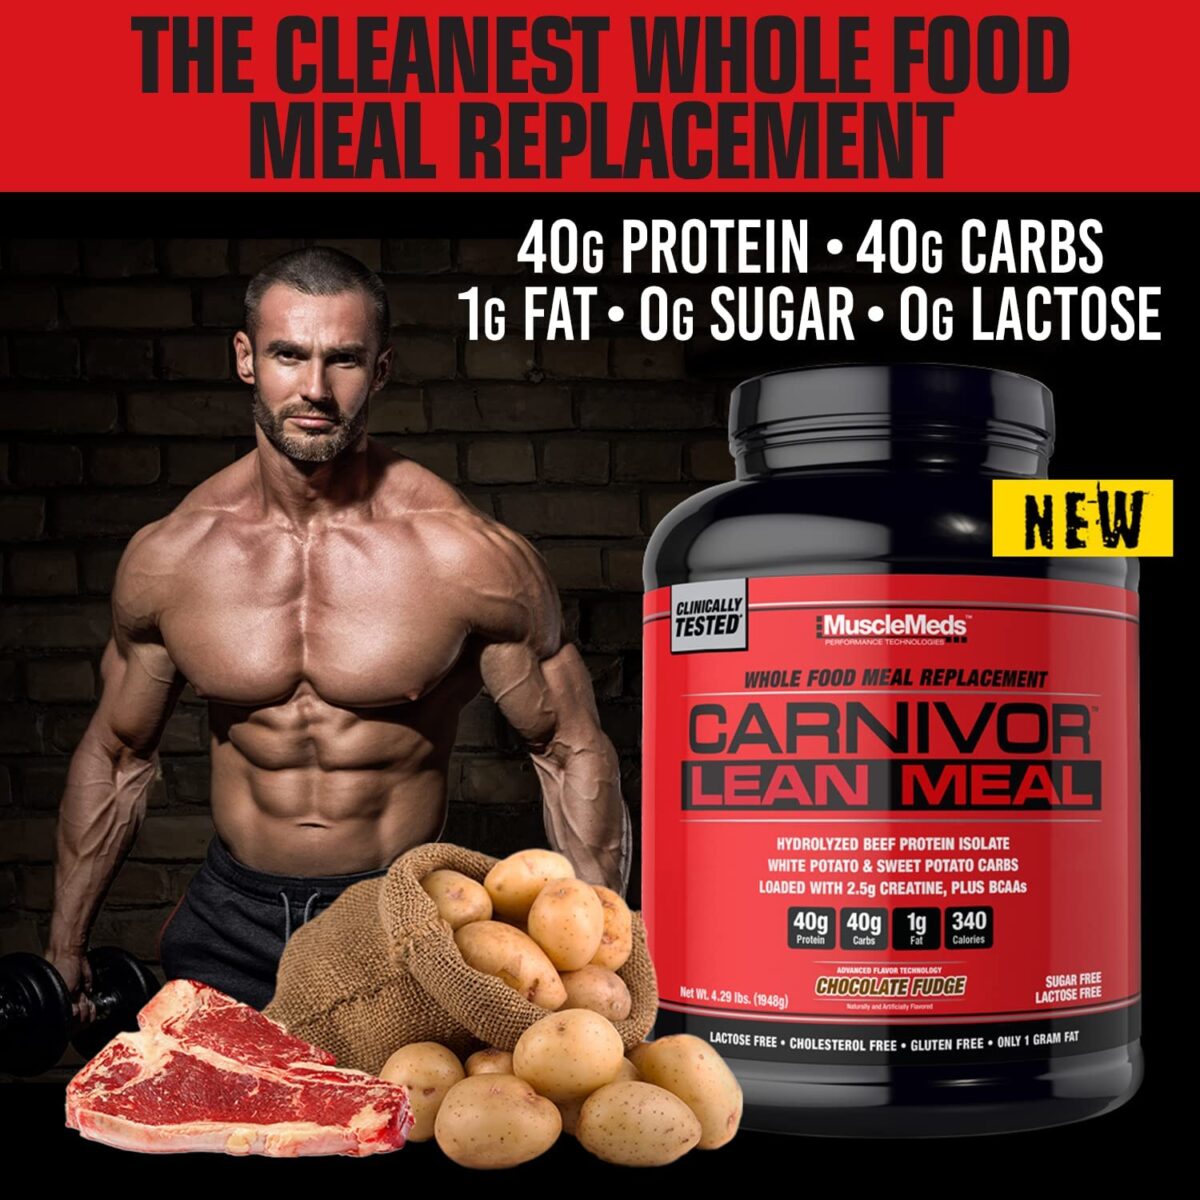 MuscleMeds – Carnivor Lean Meal Whole Food Meal Replacement – Hydrolyzed Beef Protein Isolate with White Potato, Sweet Potato. 40g Protein, 40g Carbs, Lactose-Free Sugar-Free, Loaded with 2.5g Creatine, Plus BCAAs – 5 bs